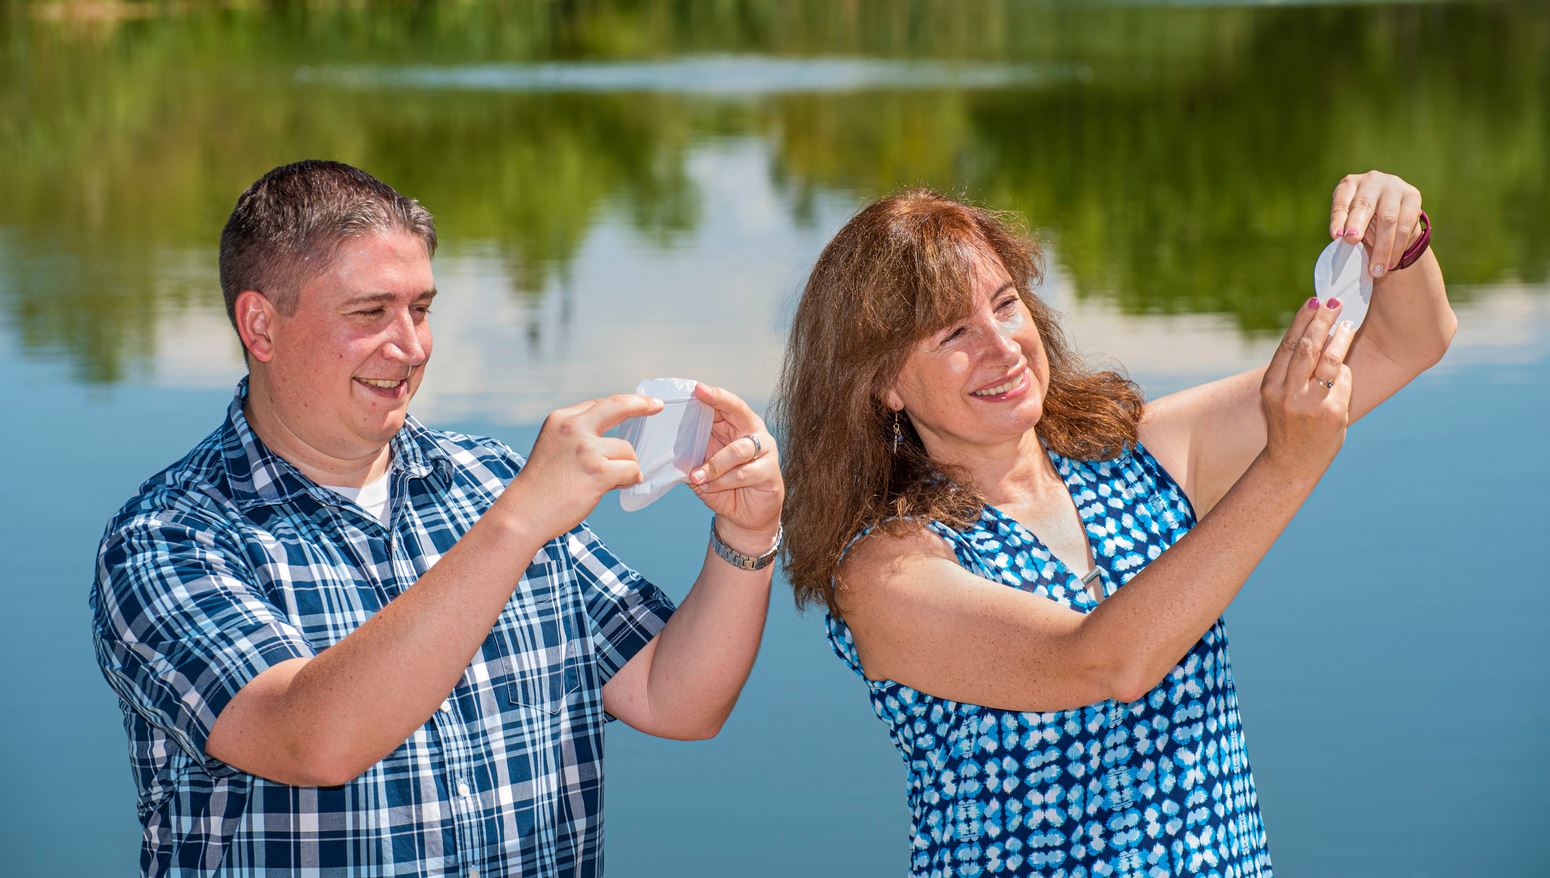 Two scientists look at hand-sized white membranes, water and lush trees in background.